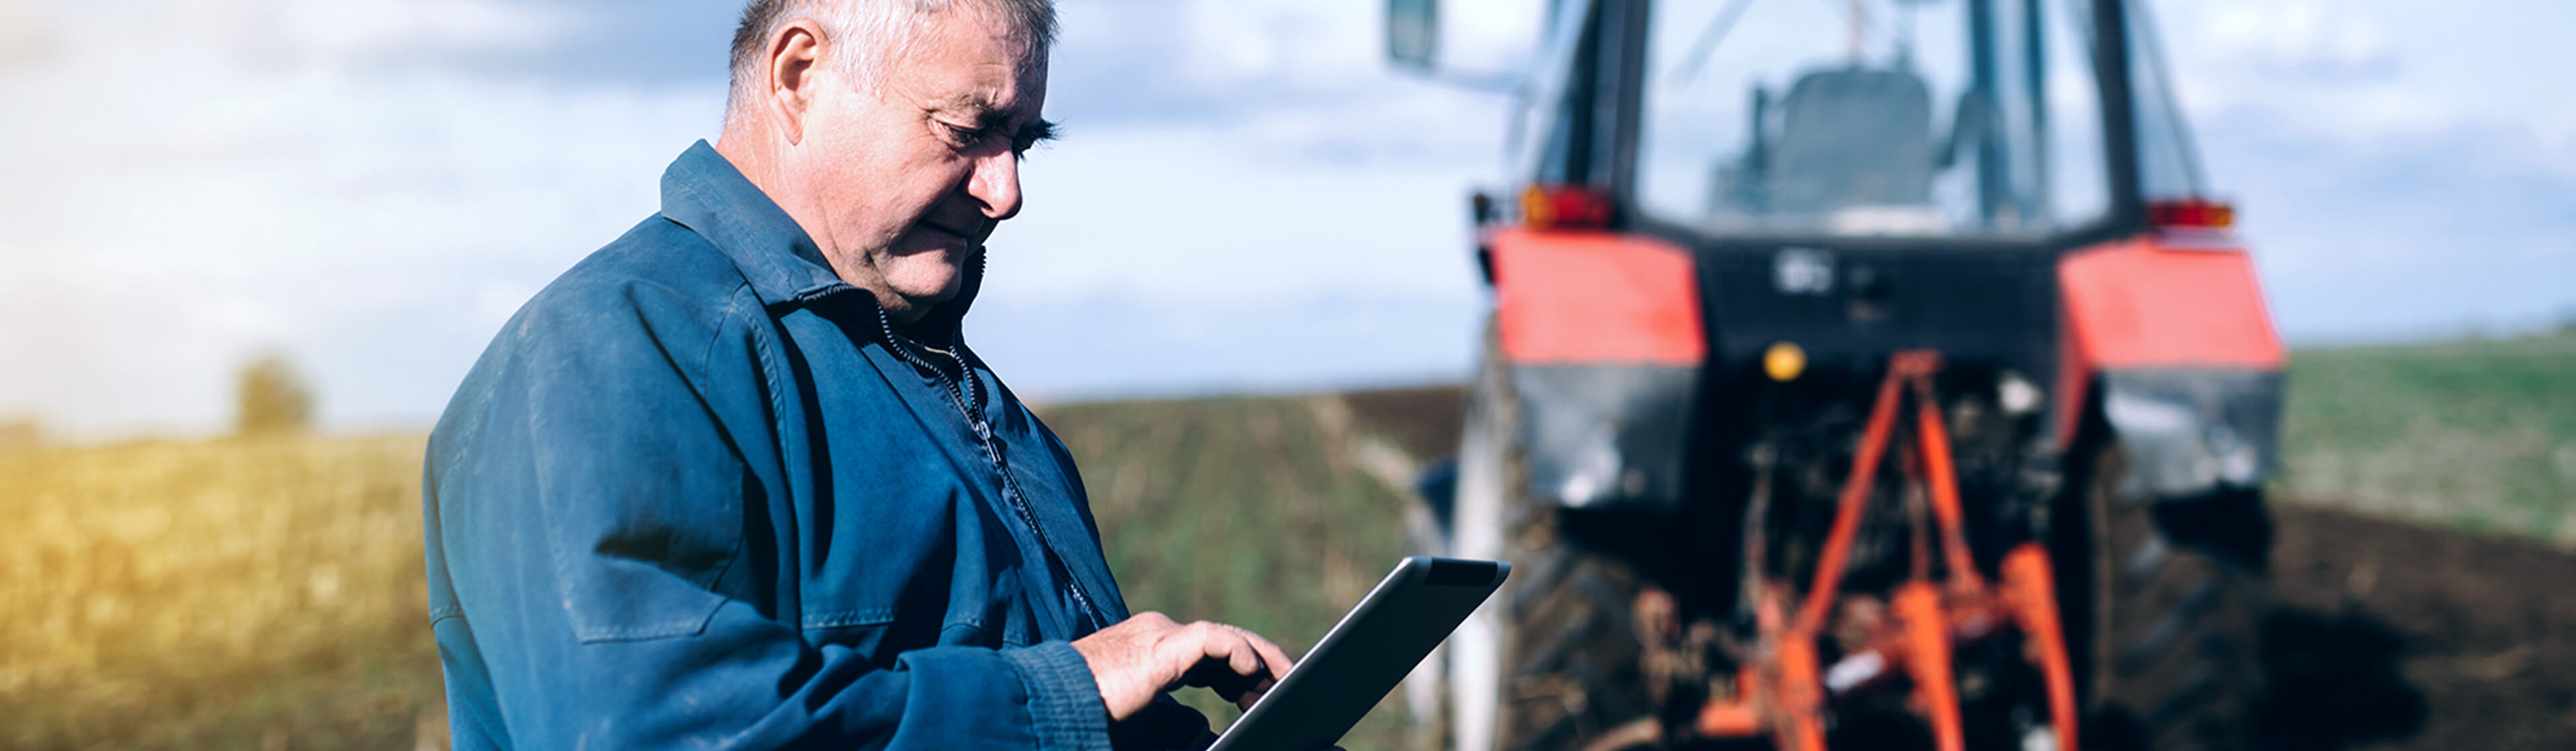 Framer using a tablet on field with red tractor in the background